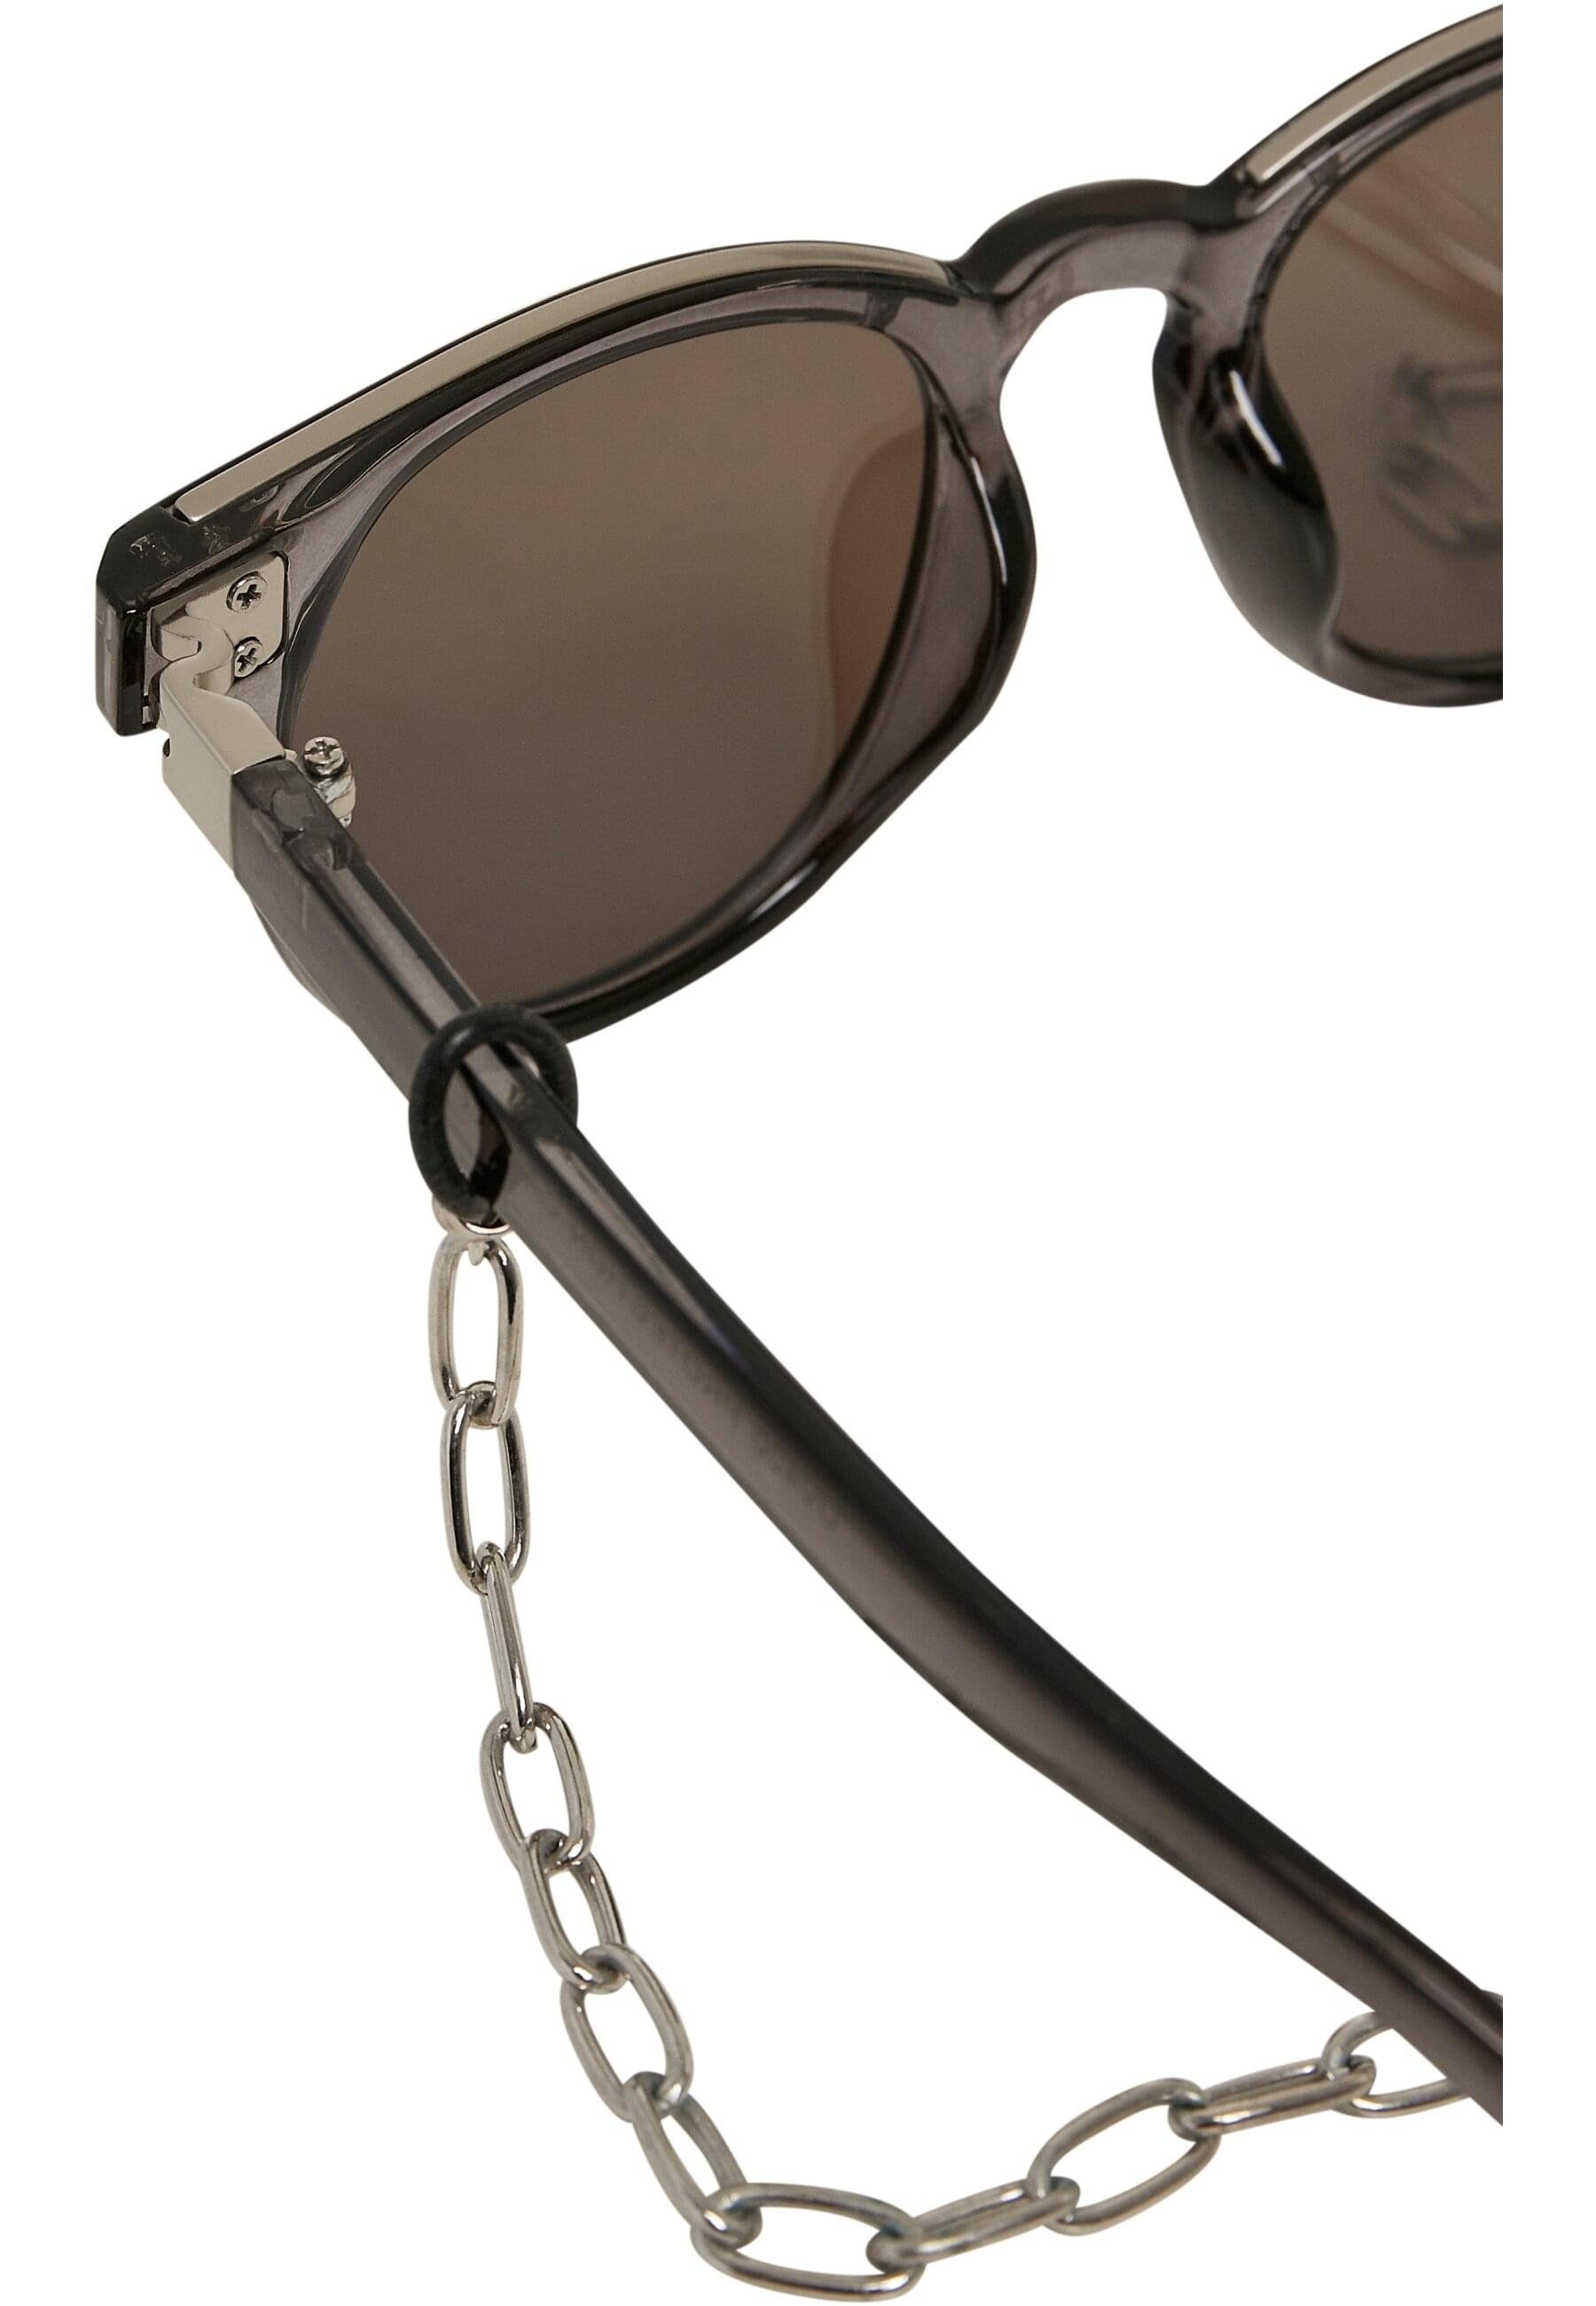 Unisex Italy Sunglasses grey/silver/silver chain CLASSICS with URBAN Sonnenbrille